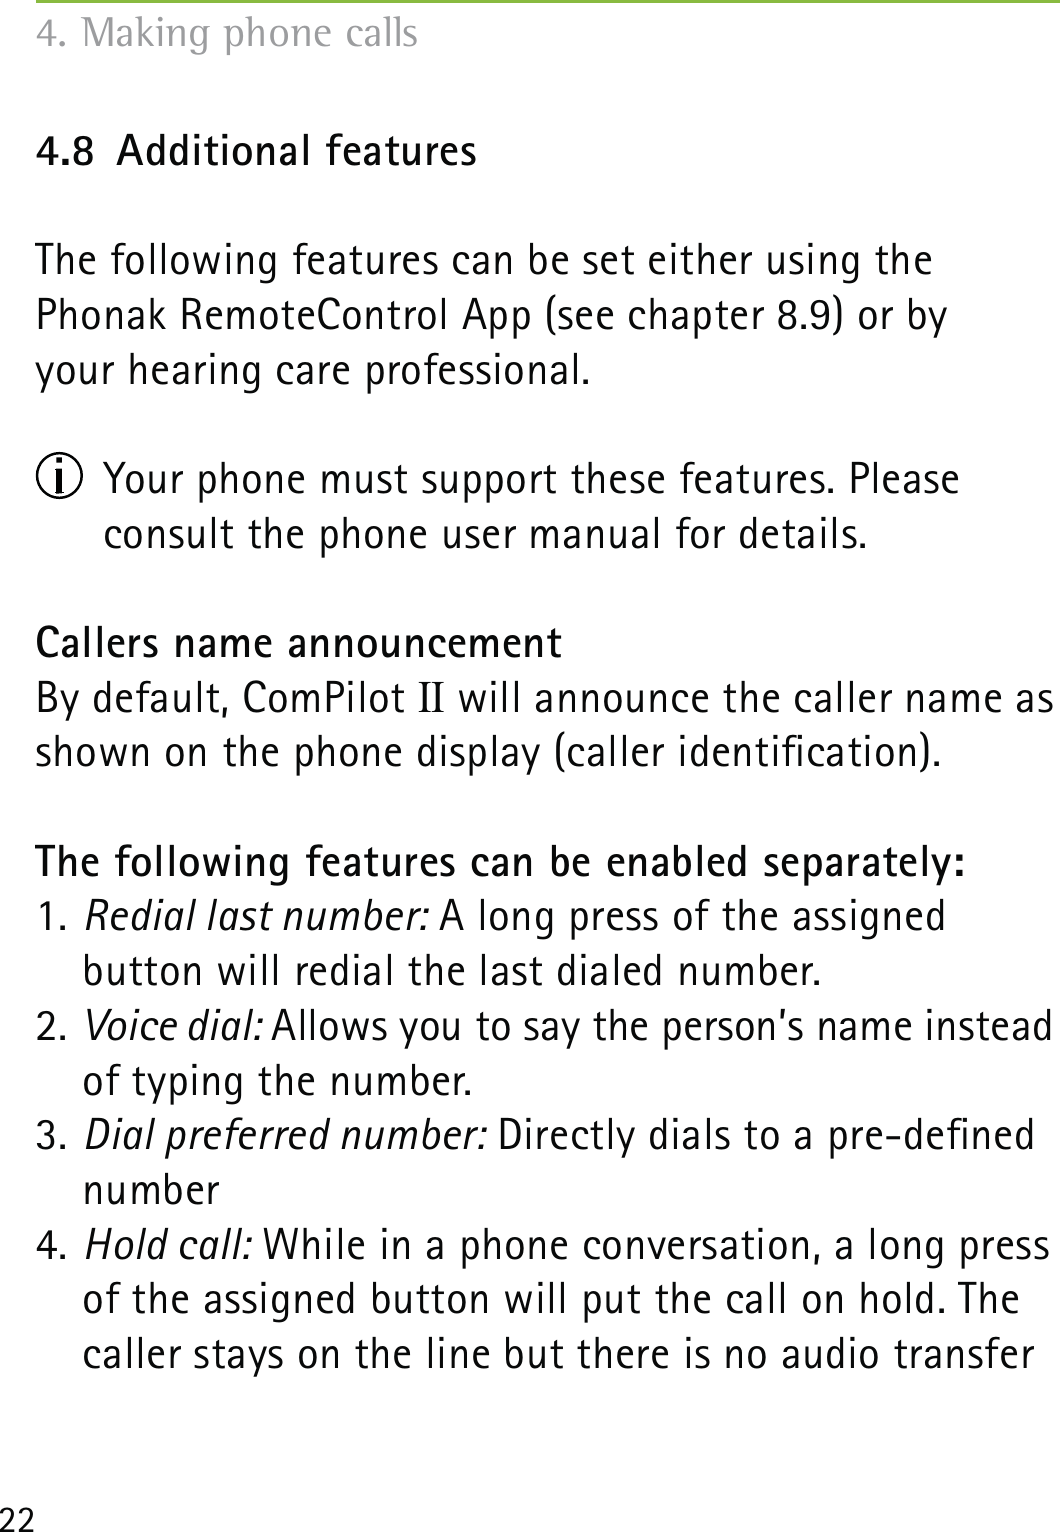 224.8  Additional featuresThe following features can be set either using the  Phonak RemoteControl App (see chapter 8.9) or by  your hearing care professional.  Your phone must support these features. Please  consult the phone user manual for details.Callers name announcementBy default, ComPilot II will announce the caller name as shown on the phone display (caller identication).The following features can be enabled separately:1. Redial last number: A long press of the assigned  button will redial the last dialed number.2. Voice dial: Allows you to say the person’s name instead of typing the number.3. Dial preferred number: Directly dials to a pre-dened number4. Hold call: While in a phone conversation, a long press of the assigned button will put the call on hold. The caller stays on the line but there is no audio transfer 4. Making phone calls